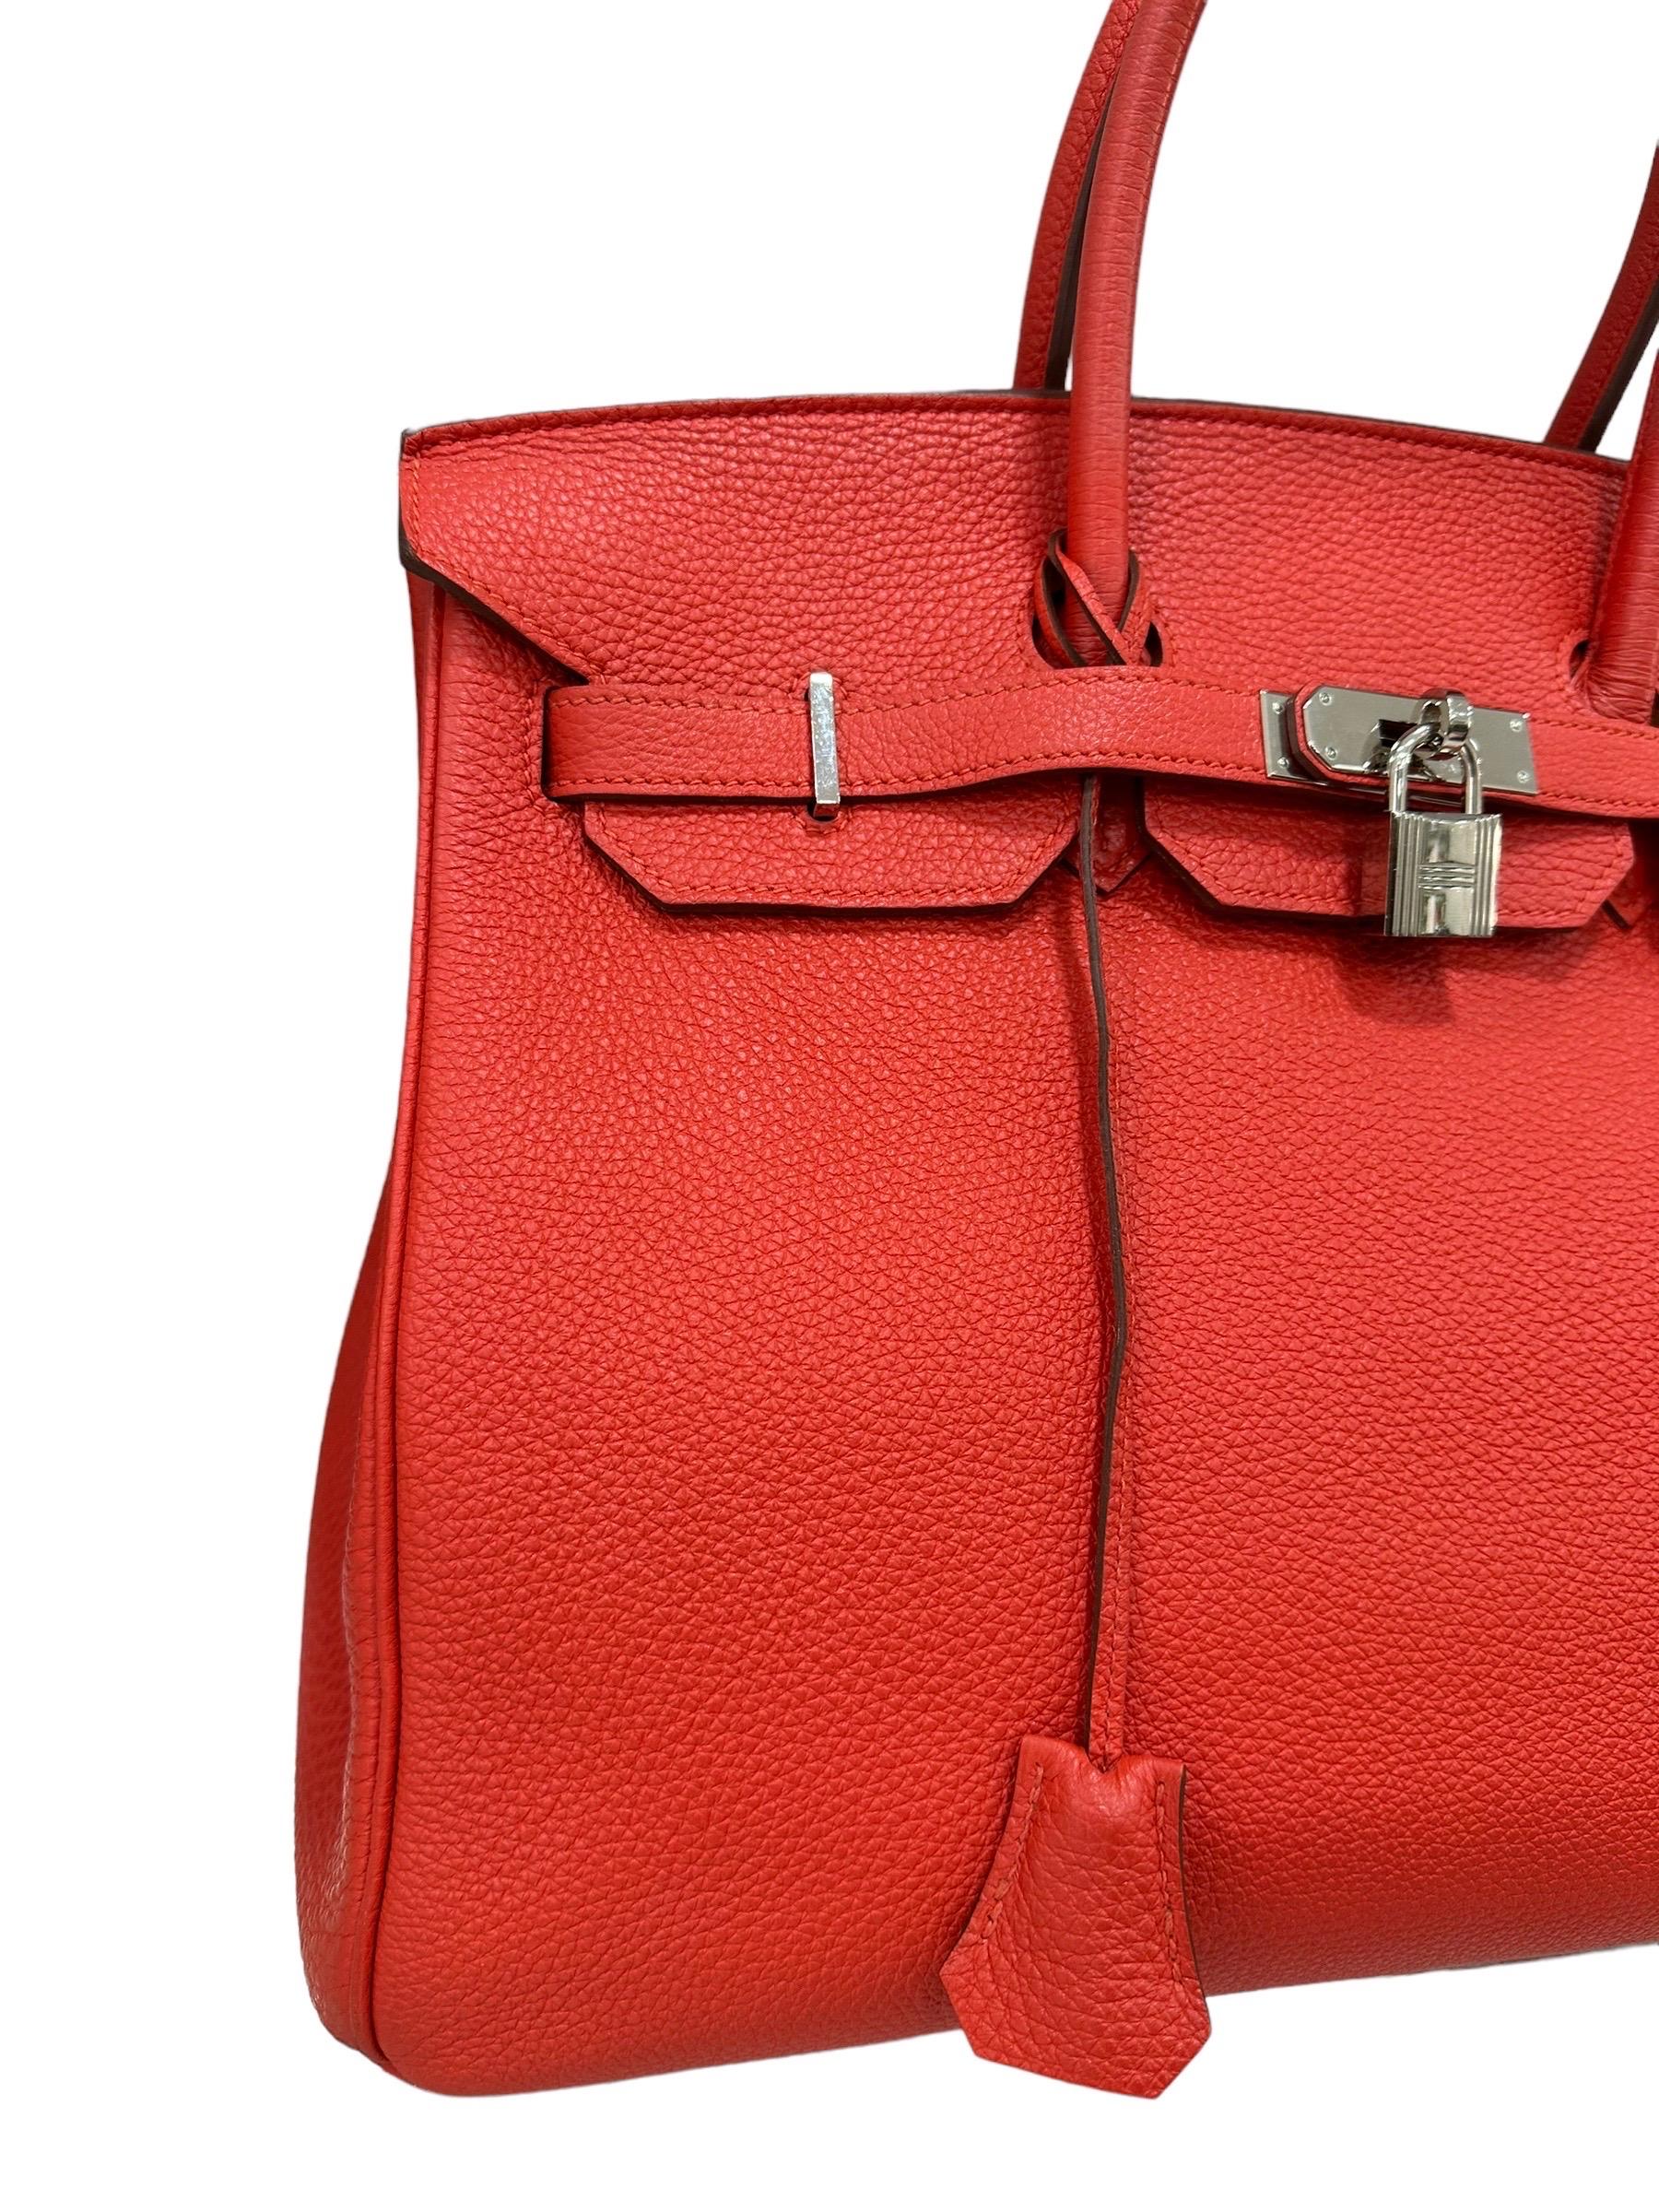 2011 Hermès Birkin 35 Togo Leather Rouge Capucine Top Handle Bag In Excellent Condition For Sale In Torre Del Greco, IT